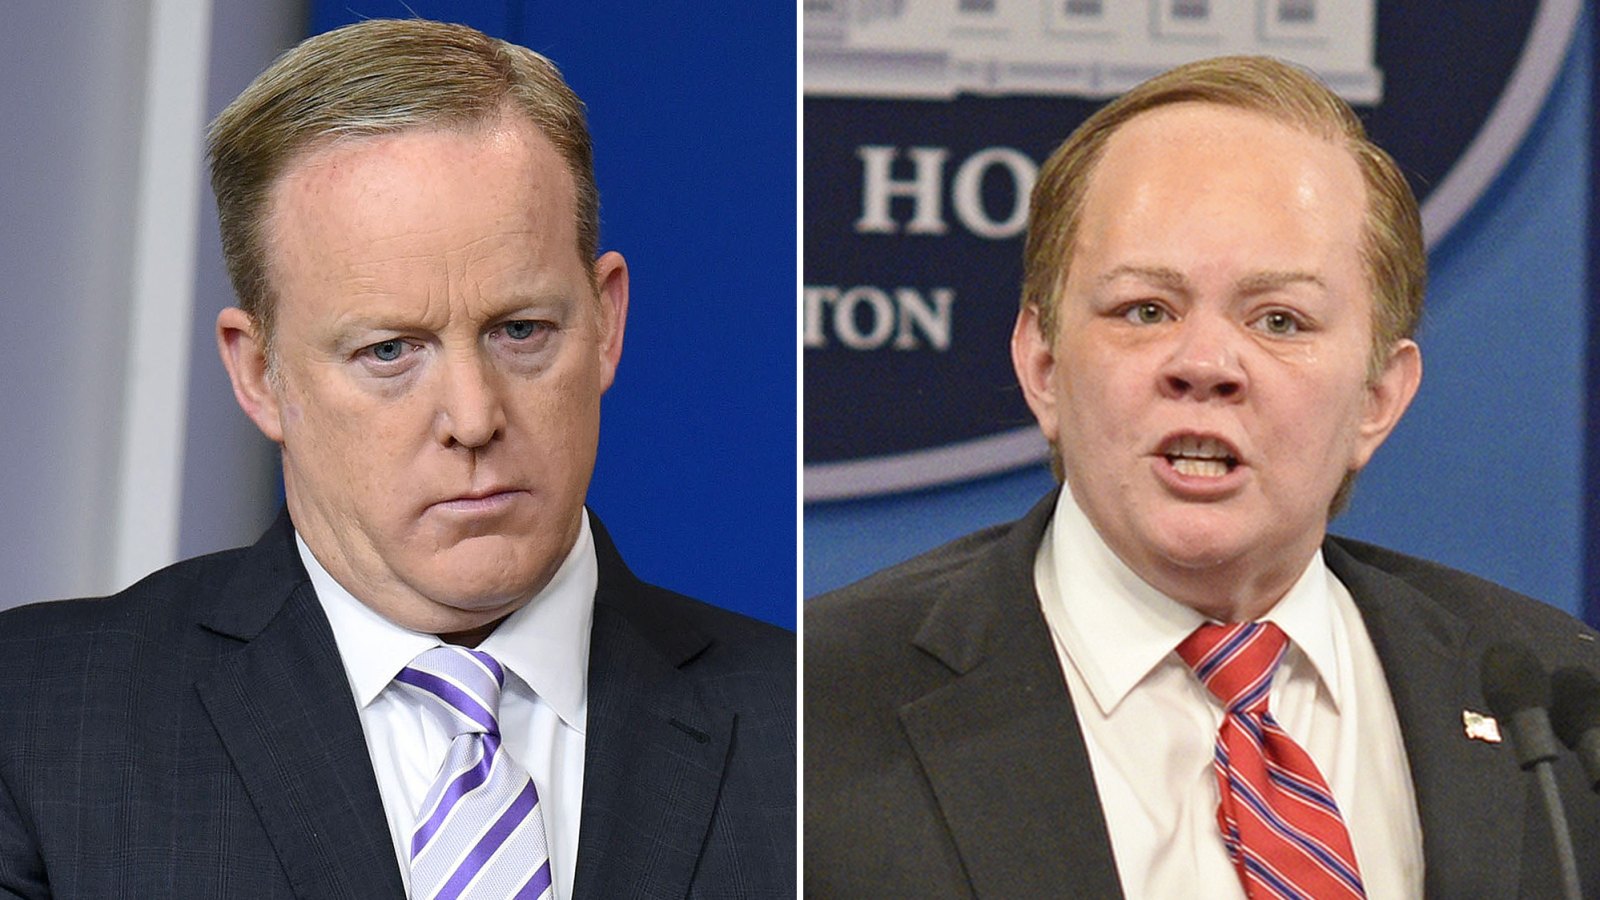 Sean Spicer and Melissa McCarthy